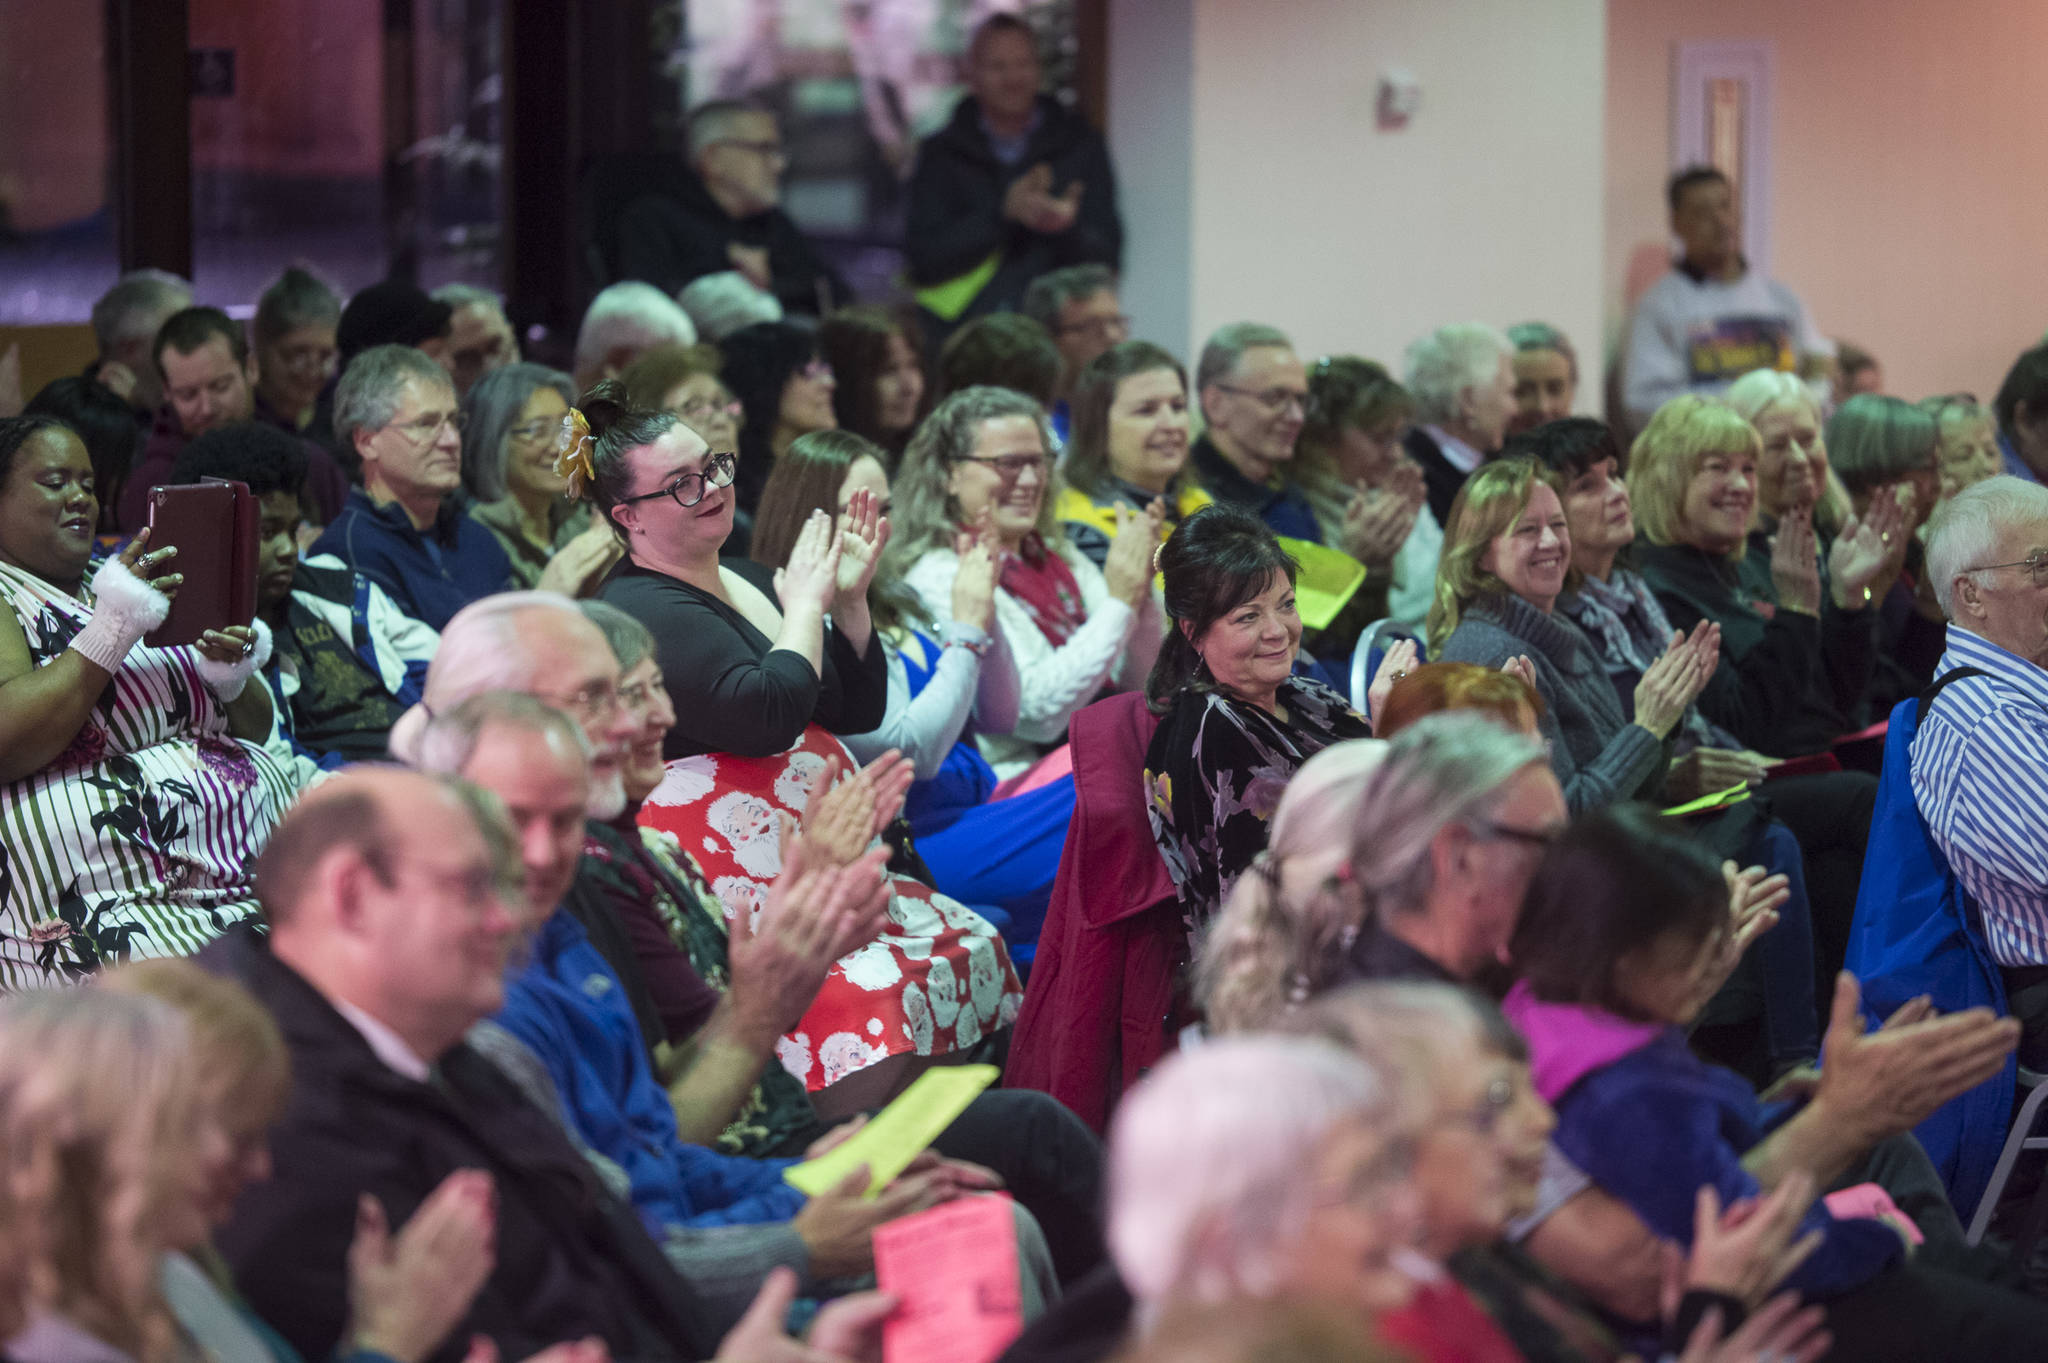 Juneau residents fill the seats for the Juneau Cabaret’s third annual Holiday Extravaganza at Centennial Hall on Wednesday, Dec. 19, 2018. (Michael Penn | Juneau Empire)